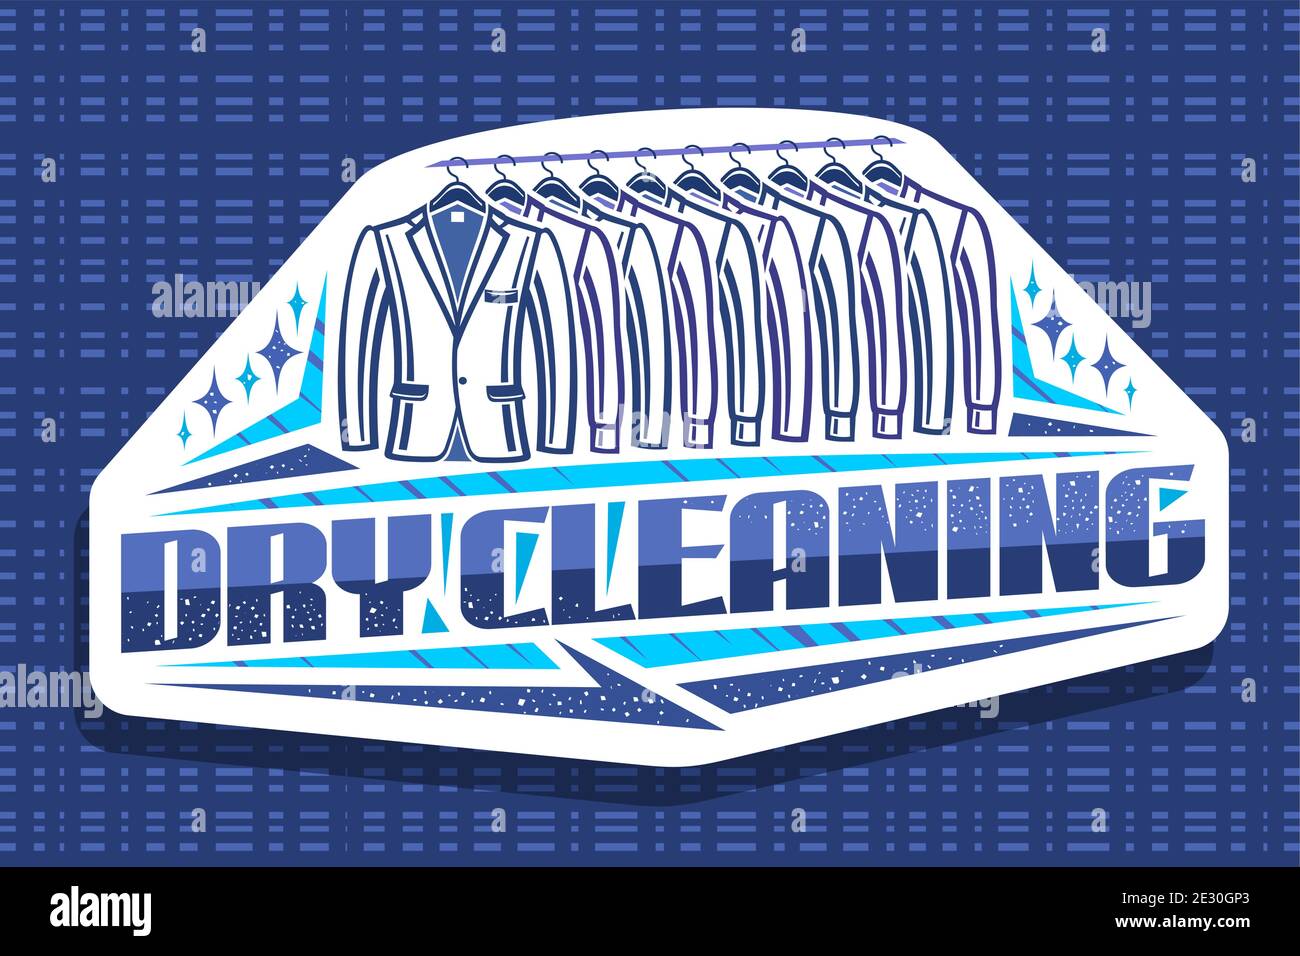 Vector logo for Dry Cleaning, white decorative sign board with contour illustration of trendy tuxedos and shirts hanging on rack in a row, creative ty Stock Vector